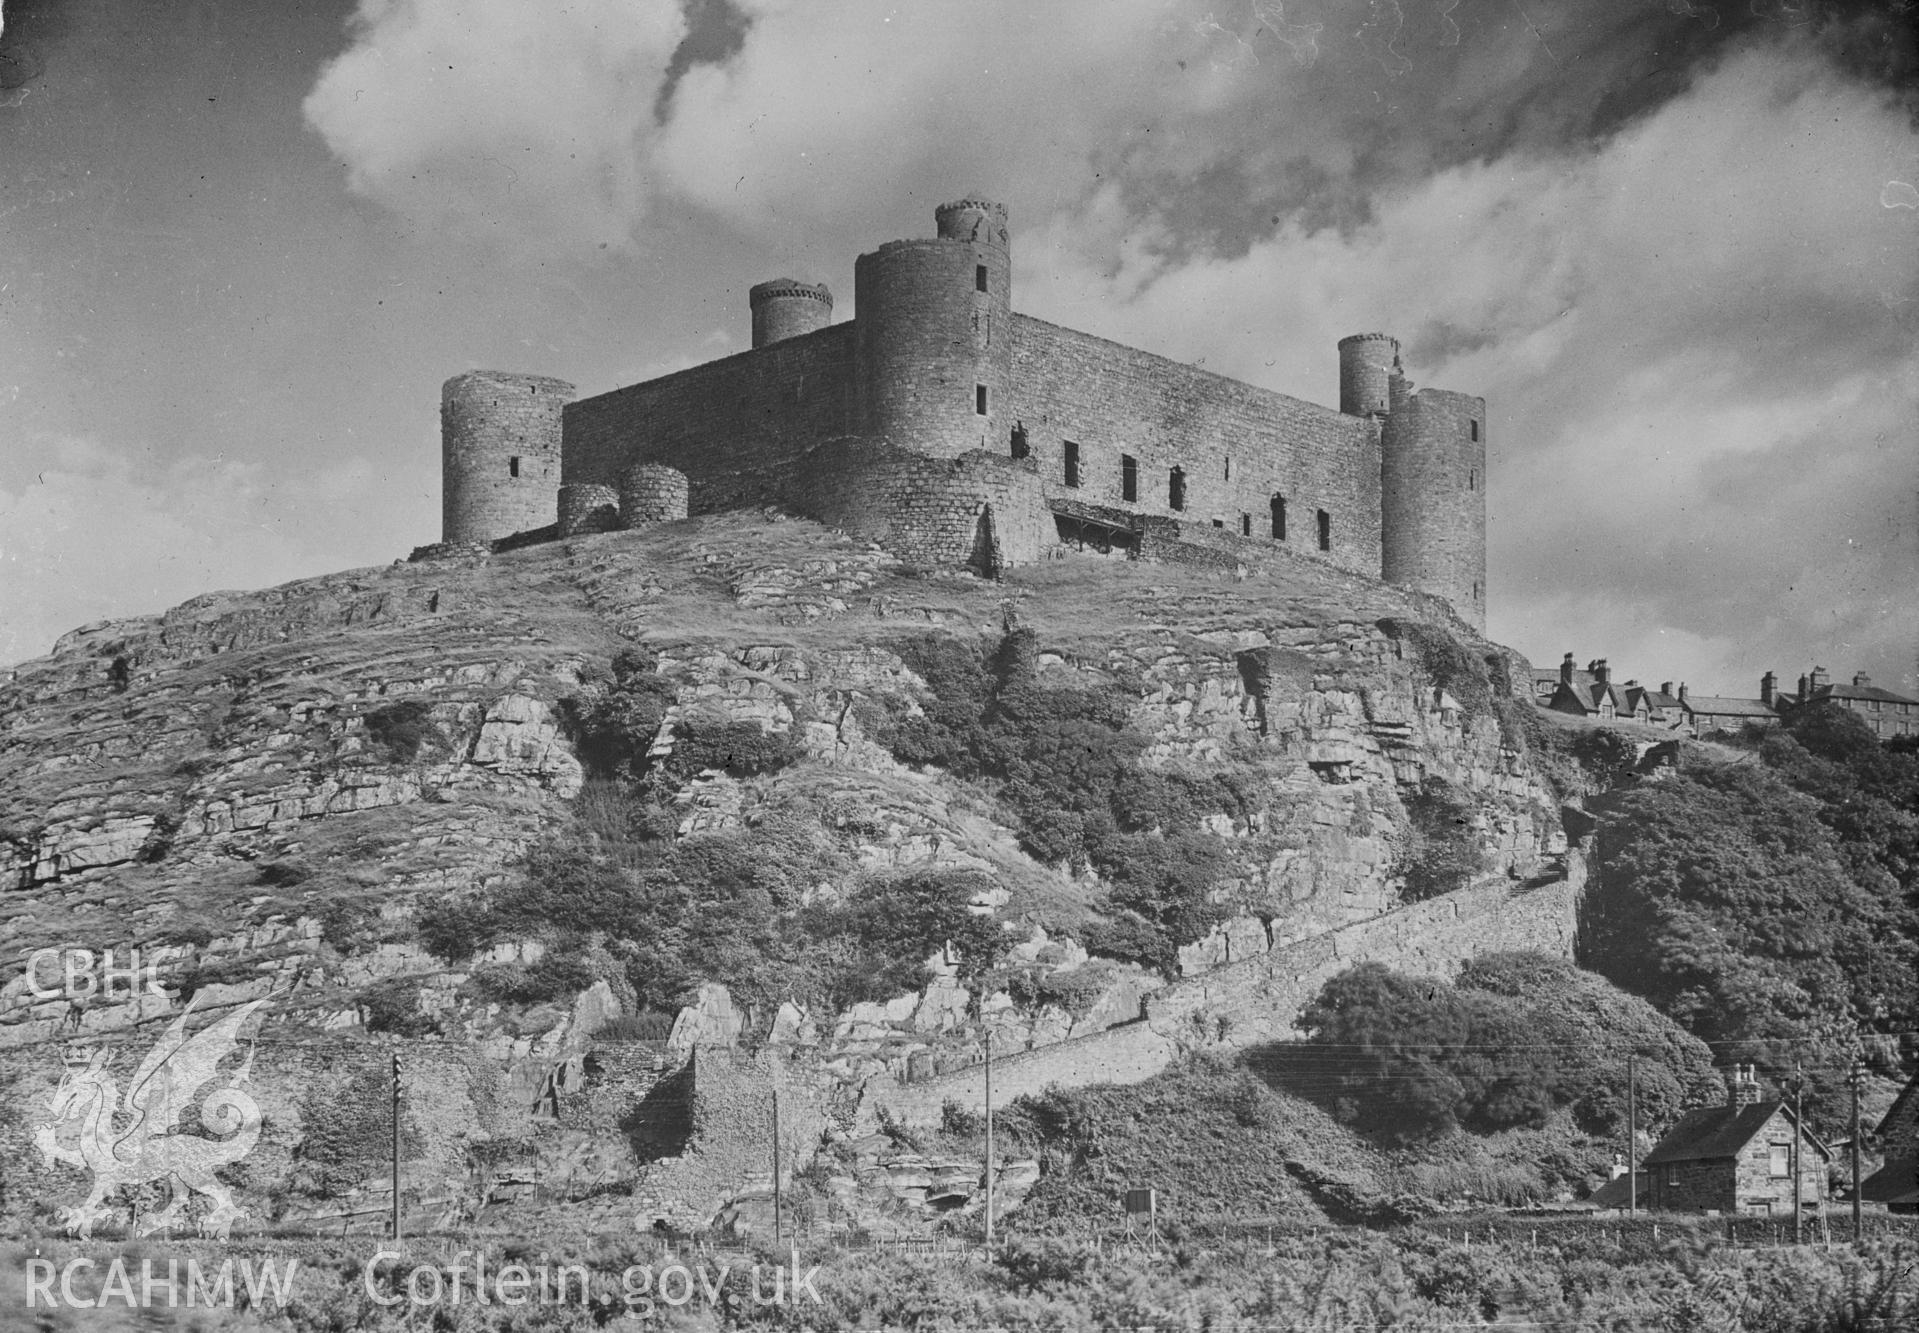 Digital copy of a negative showing view of Harlech Castle.